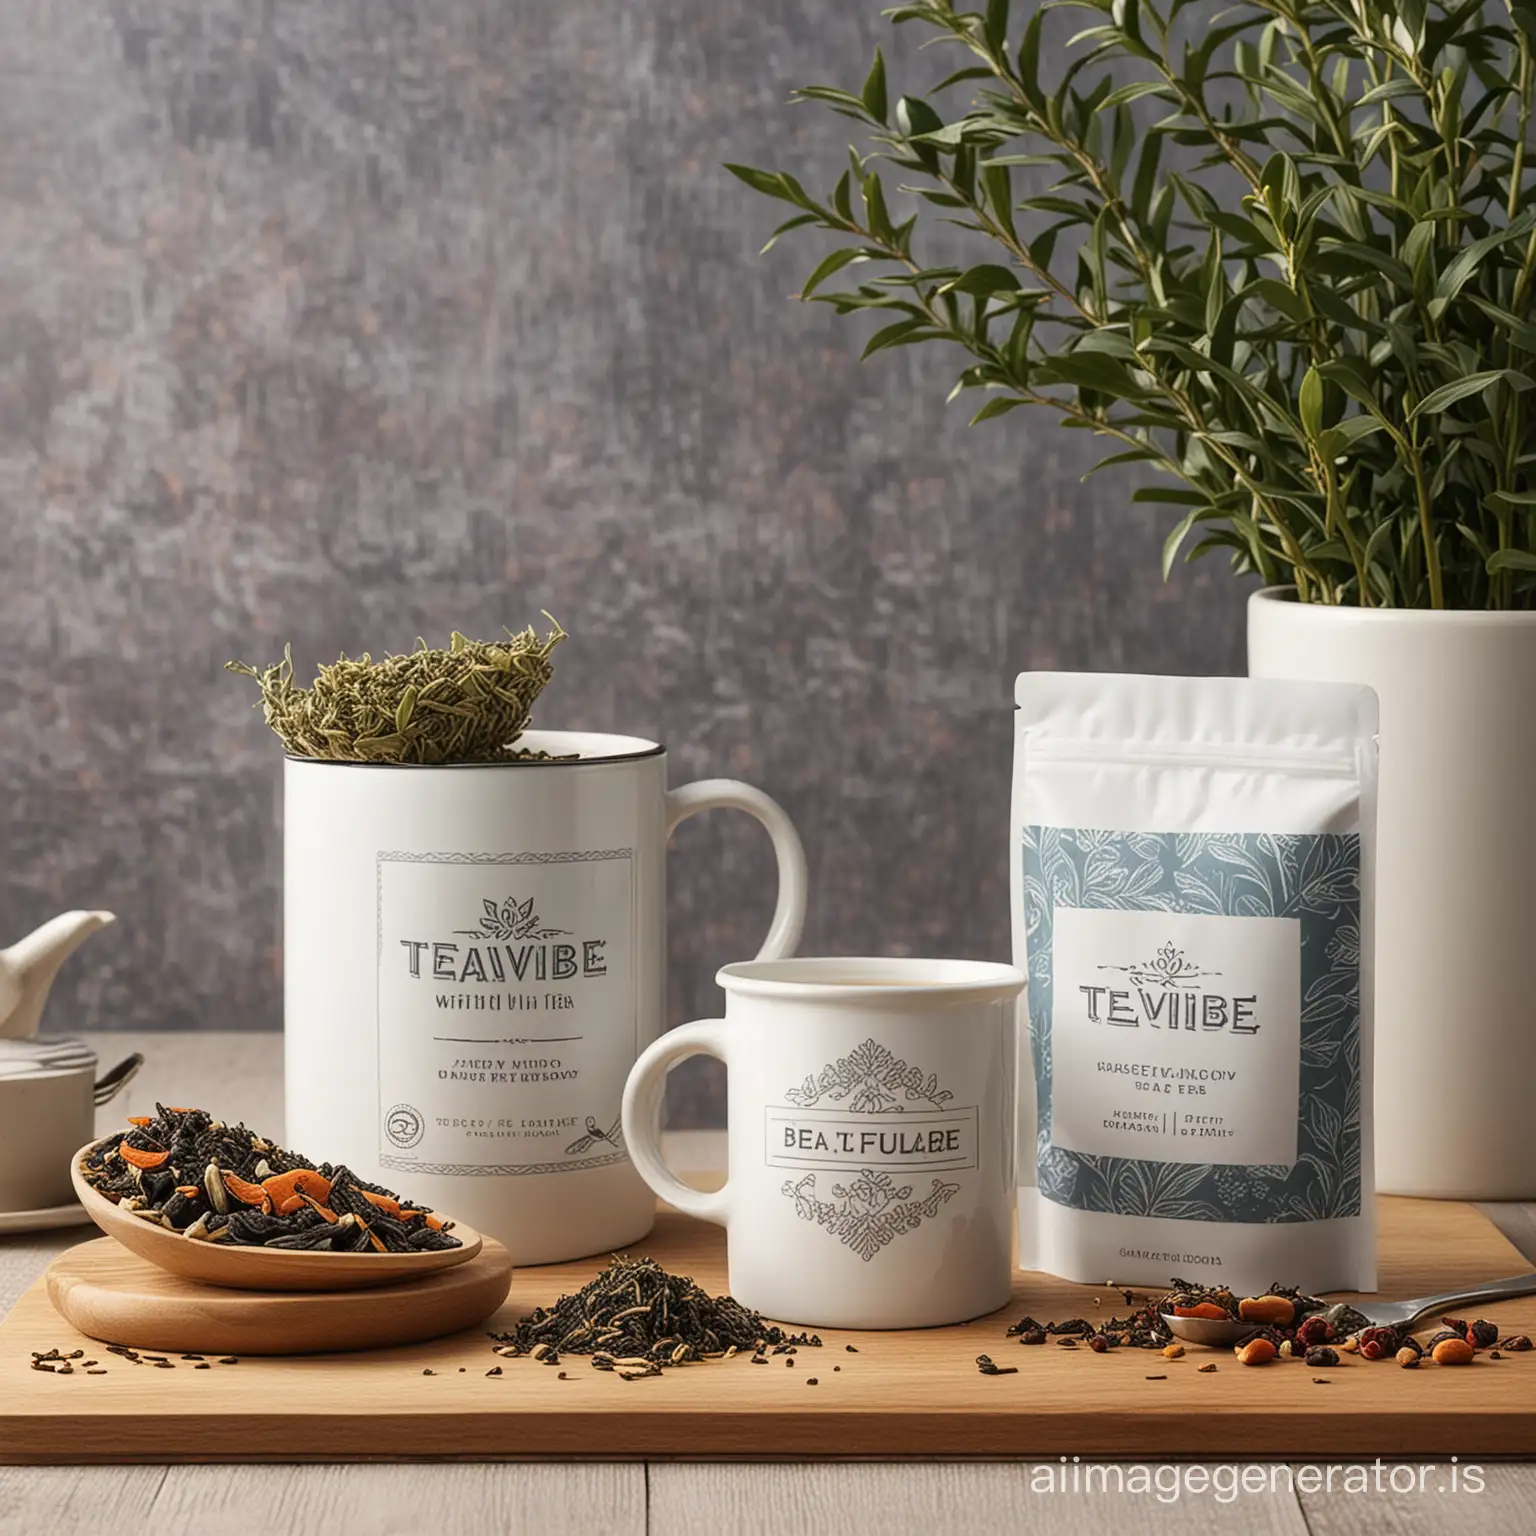 Come up with an amazing packaged tea with a the inscription TeaVibe with a mug of tea and a beautiful homely cozy background